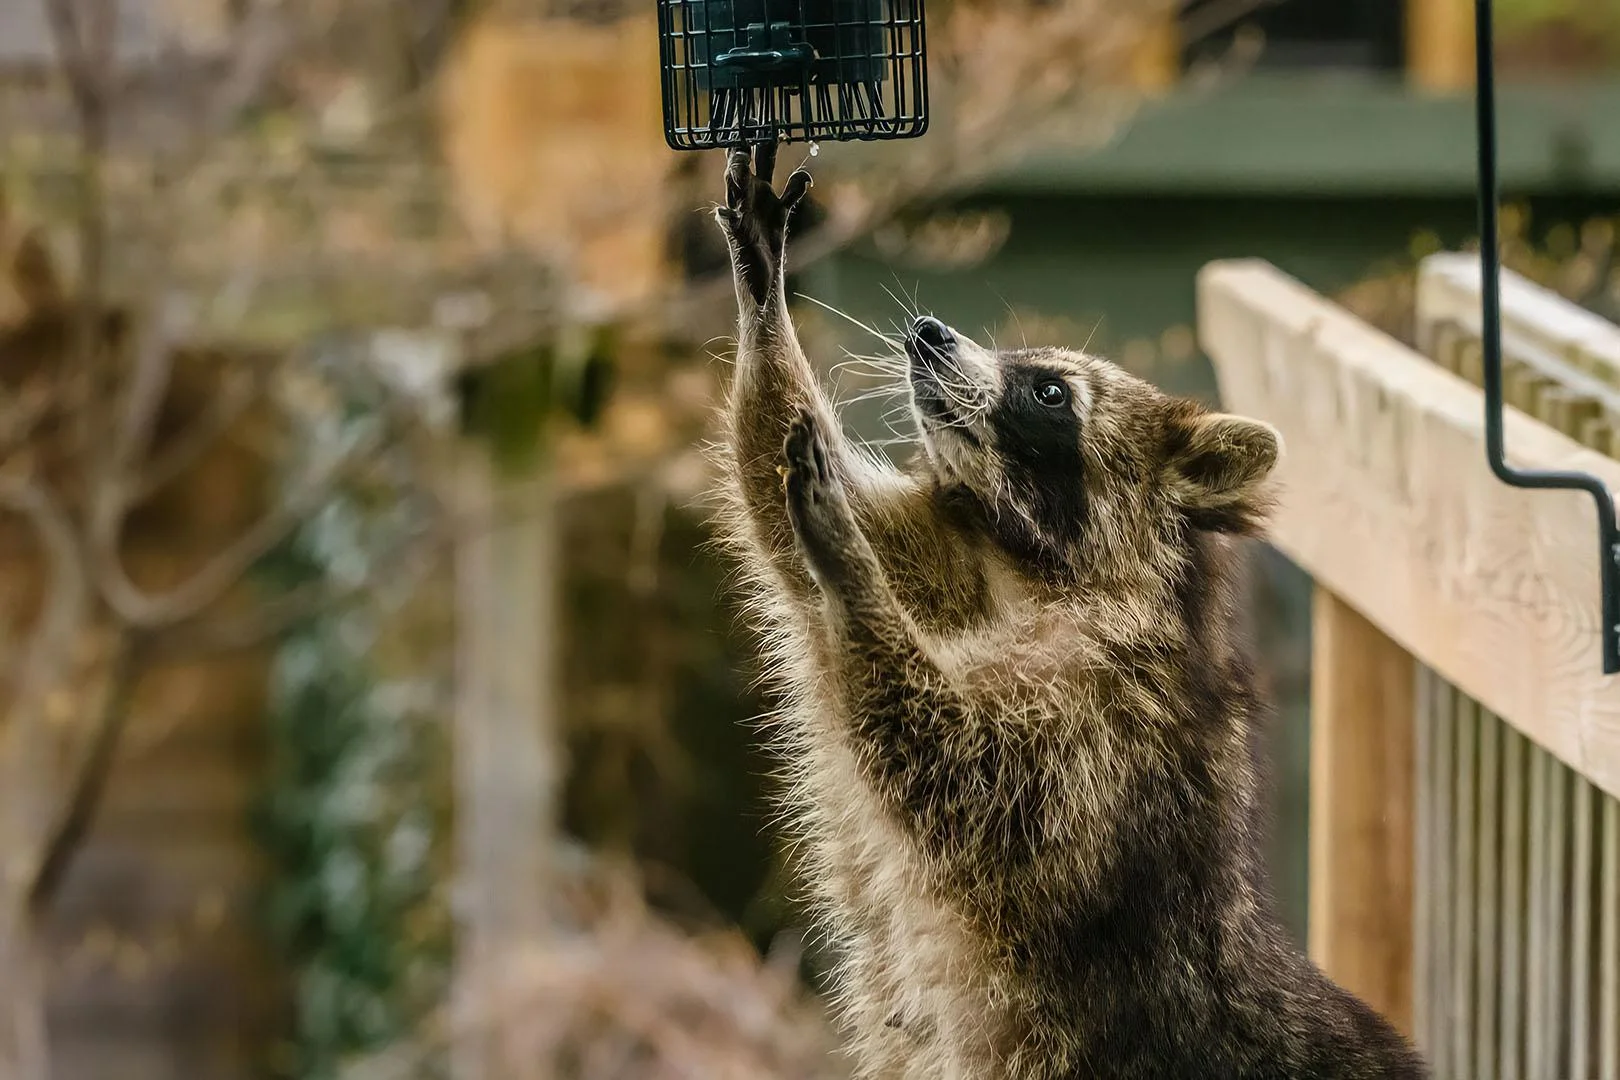 A pretty picture of a raccoon stealing bird food.